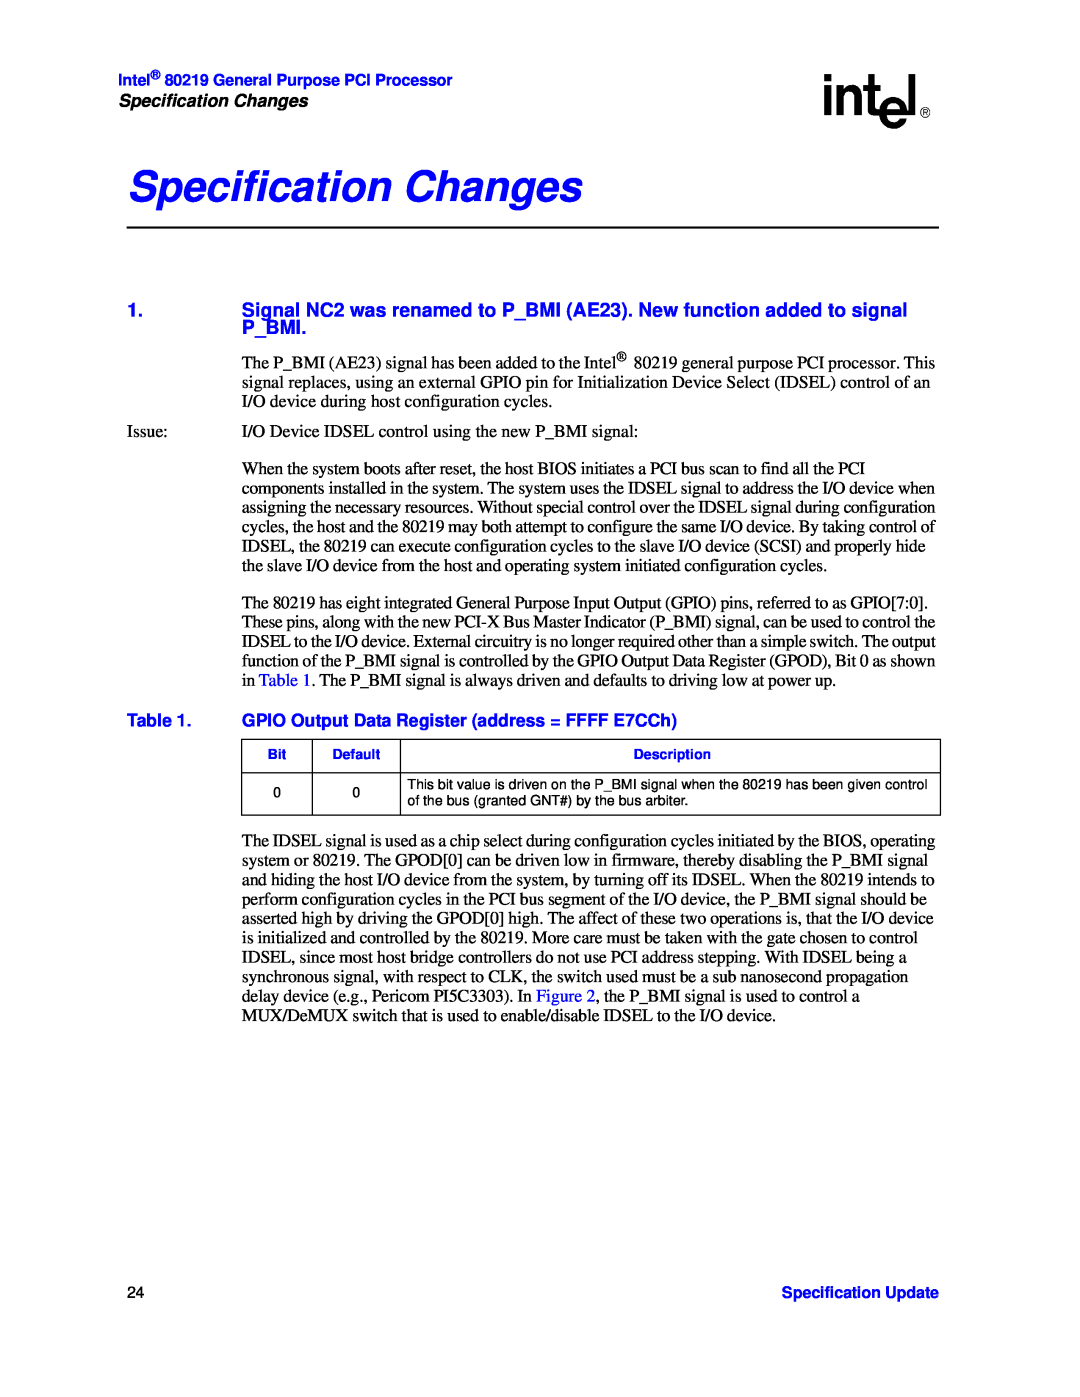 Intel 80219 specifications Specification Changes 